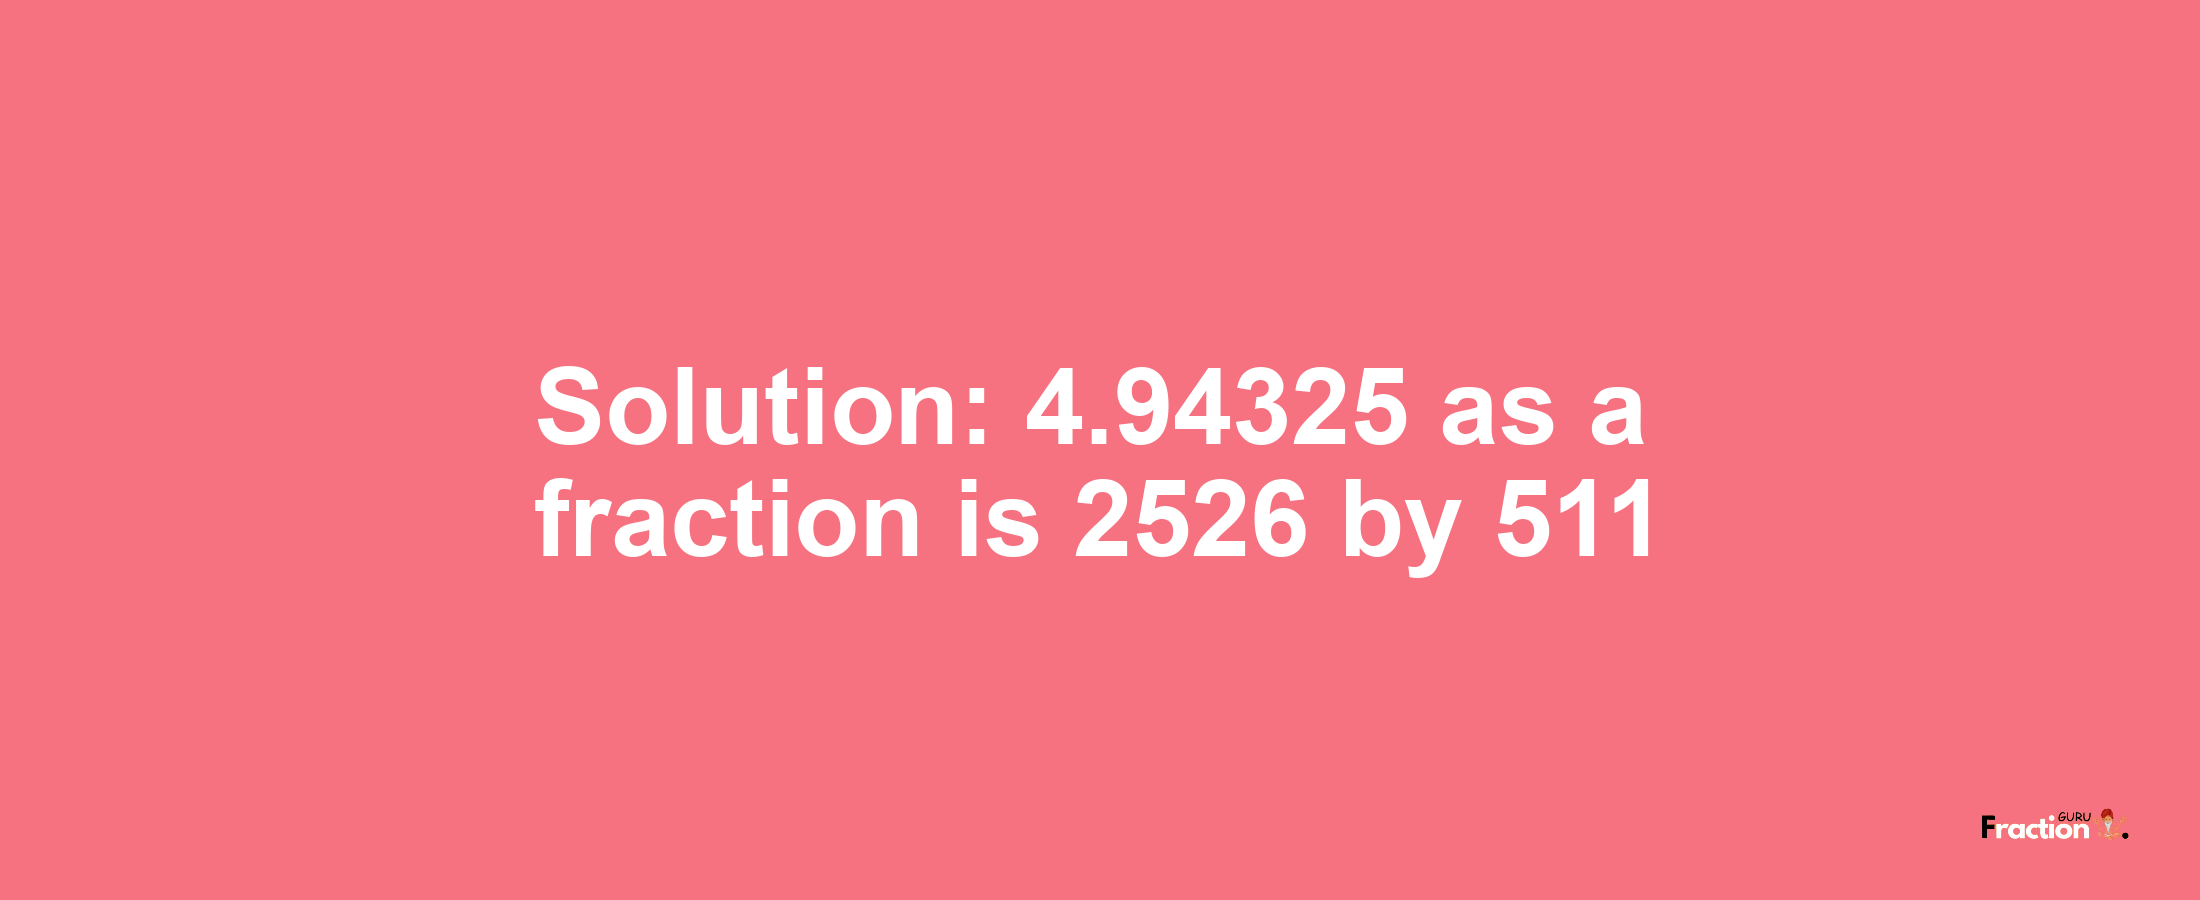 Solution:4.94325 as a fraction is 2526/511